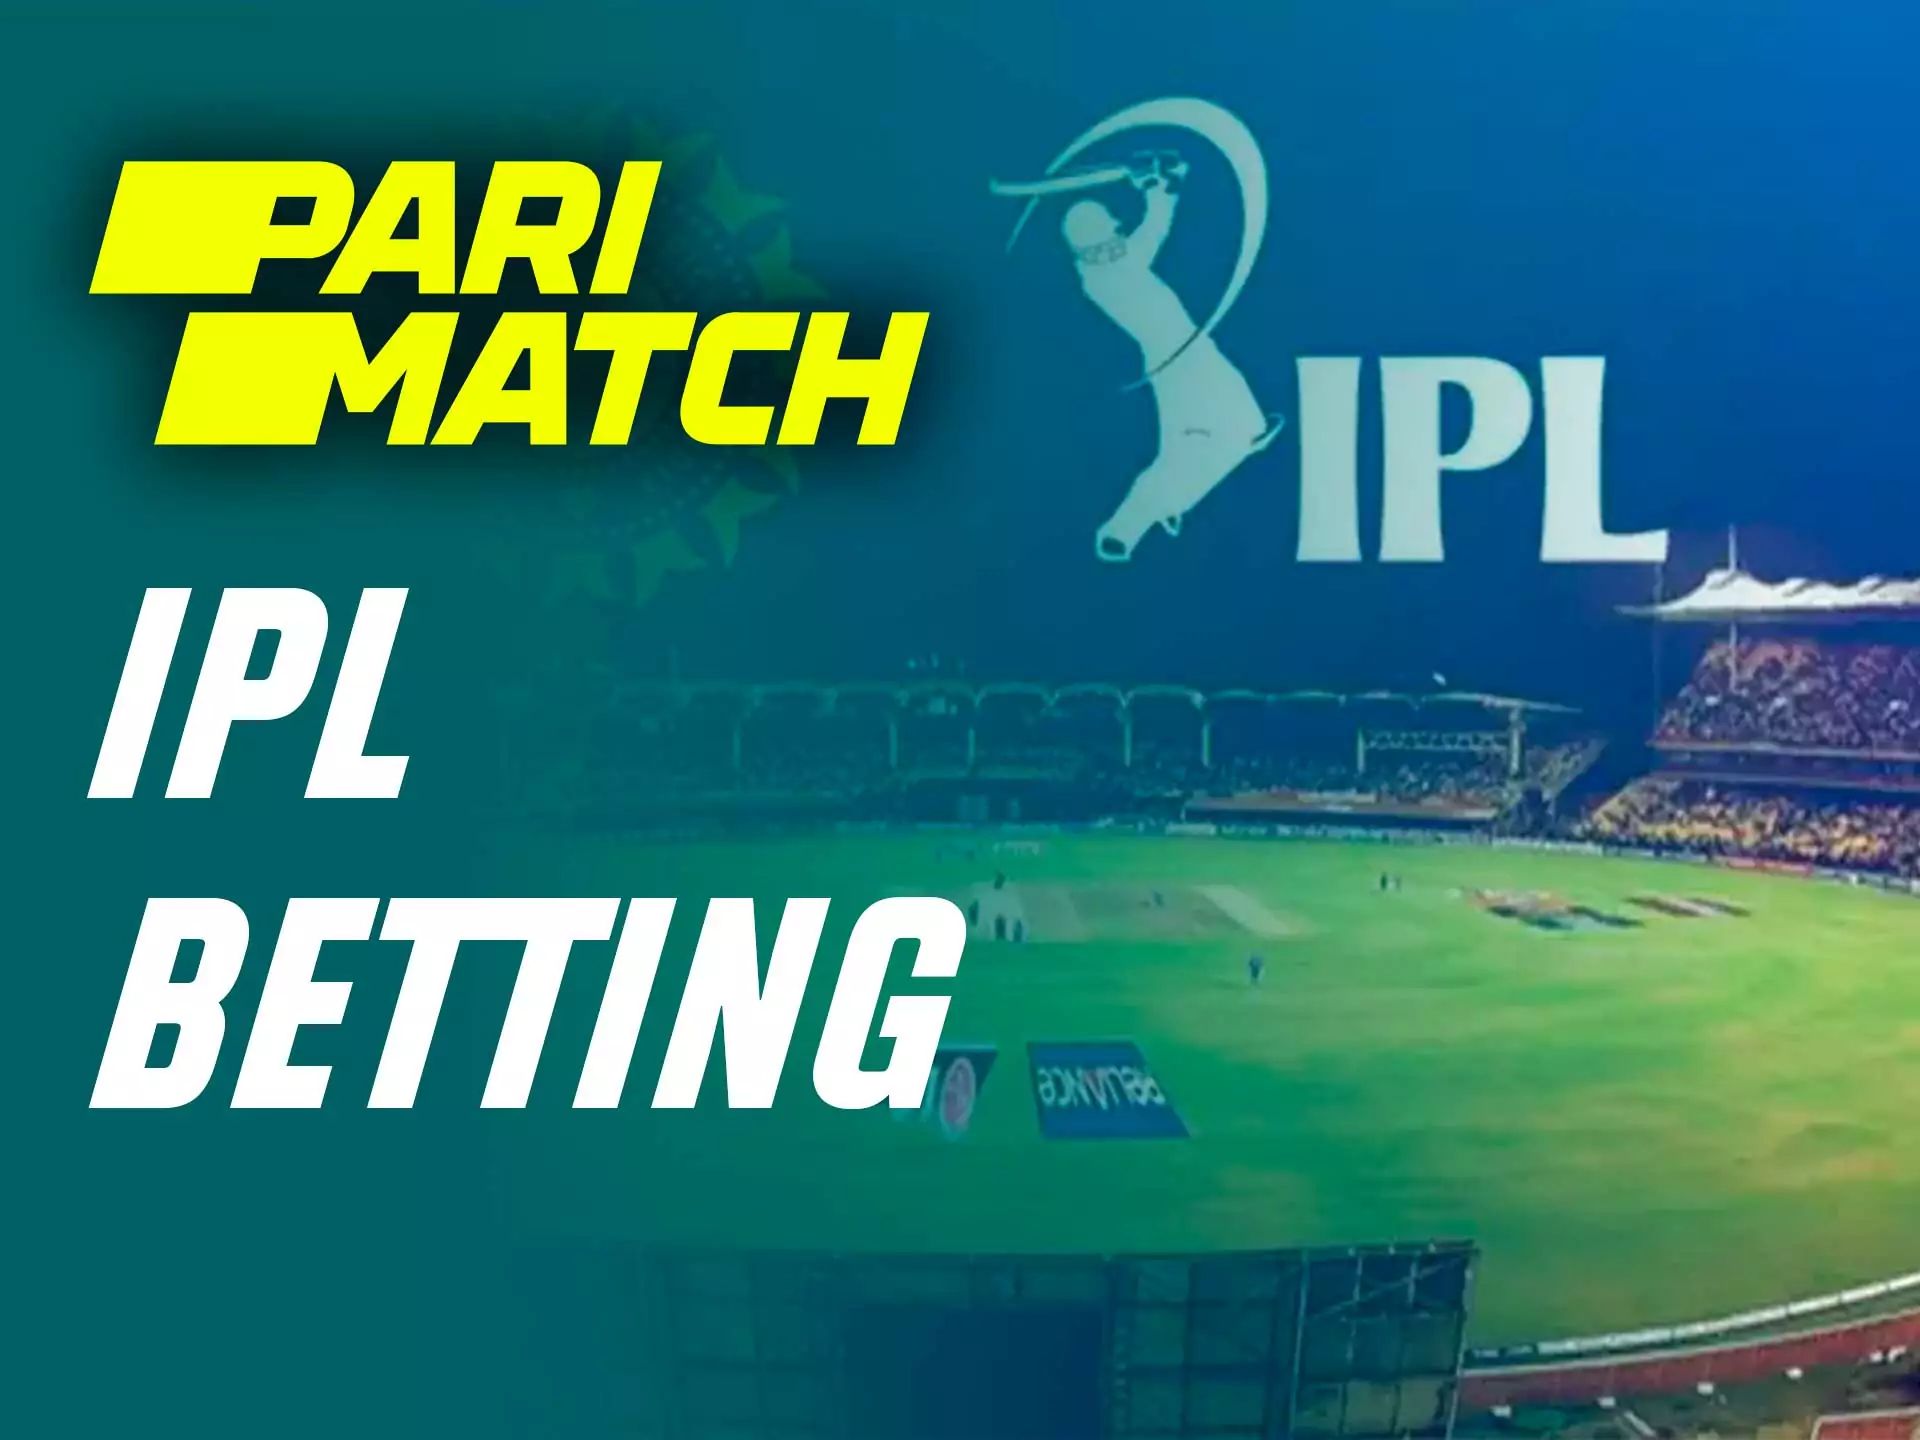 Follow the IPL matches and bet on them via the Parimatch app.